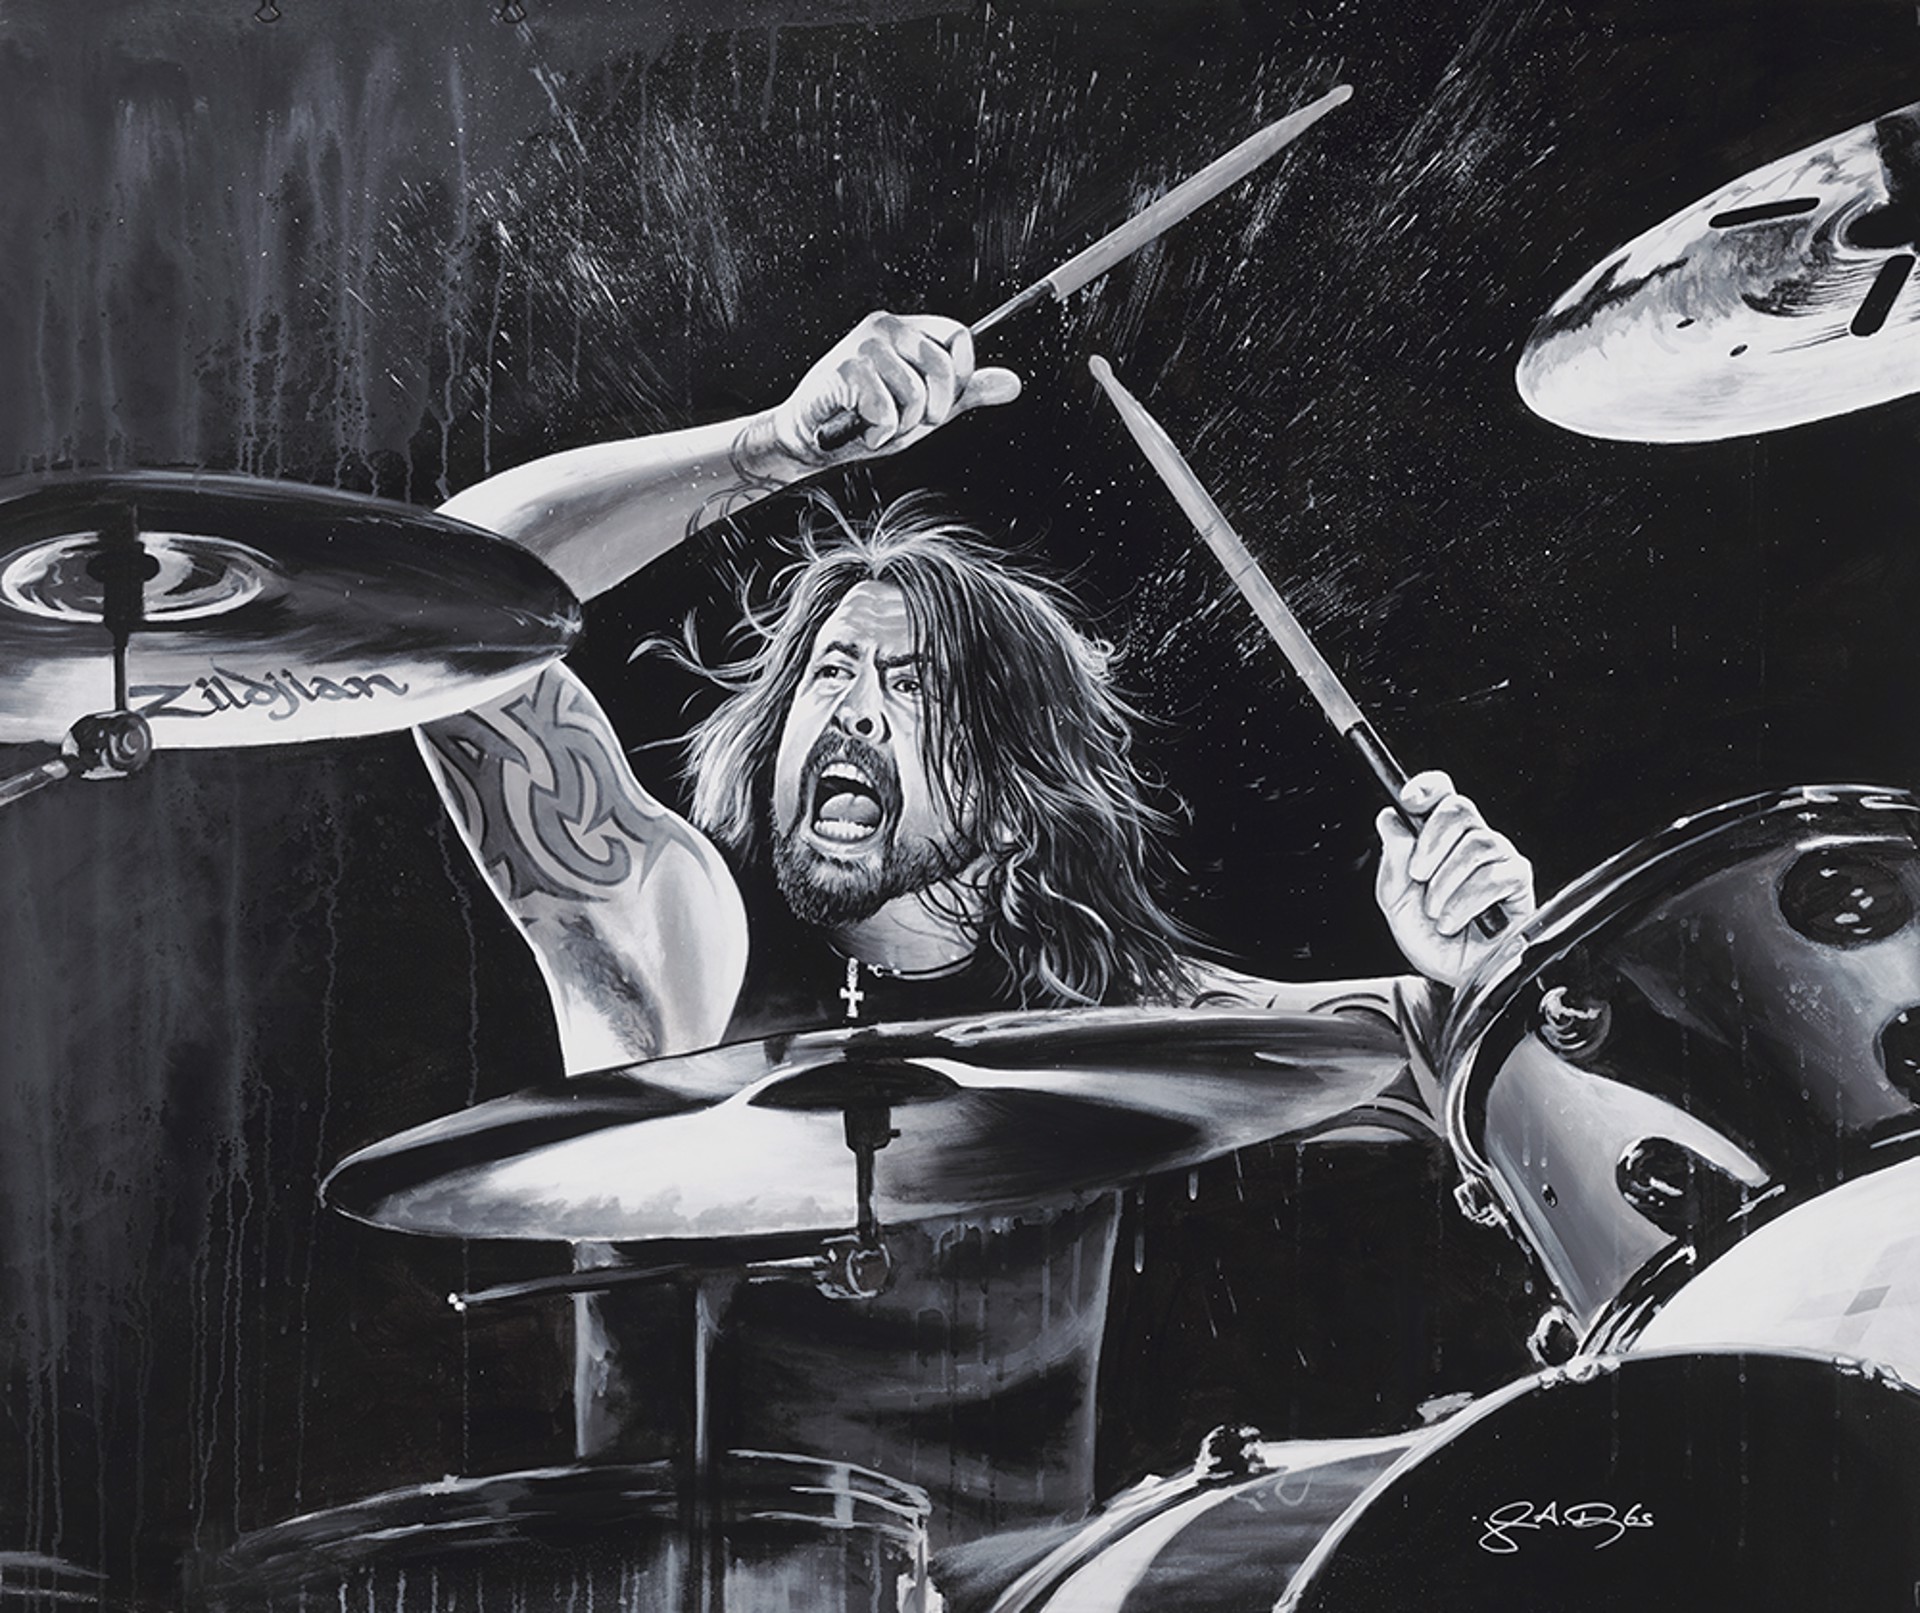 "My Hero" Dave Grohl (On Drums) by John Douglas